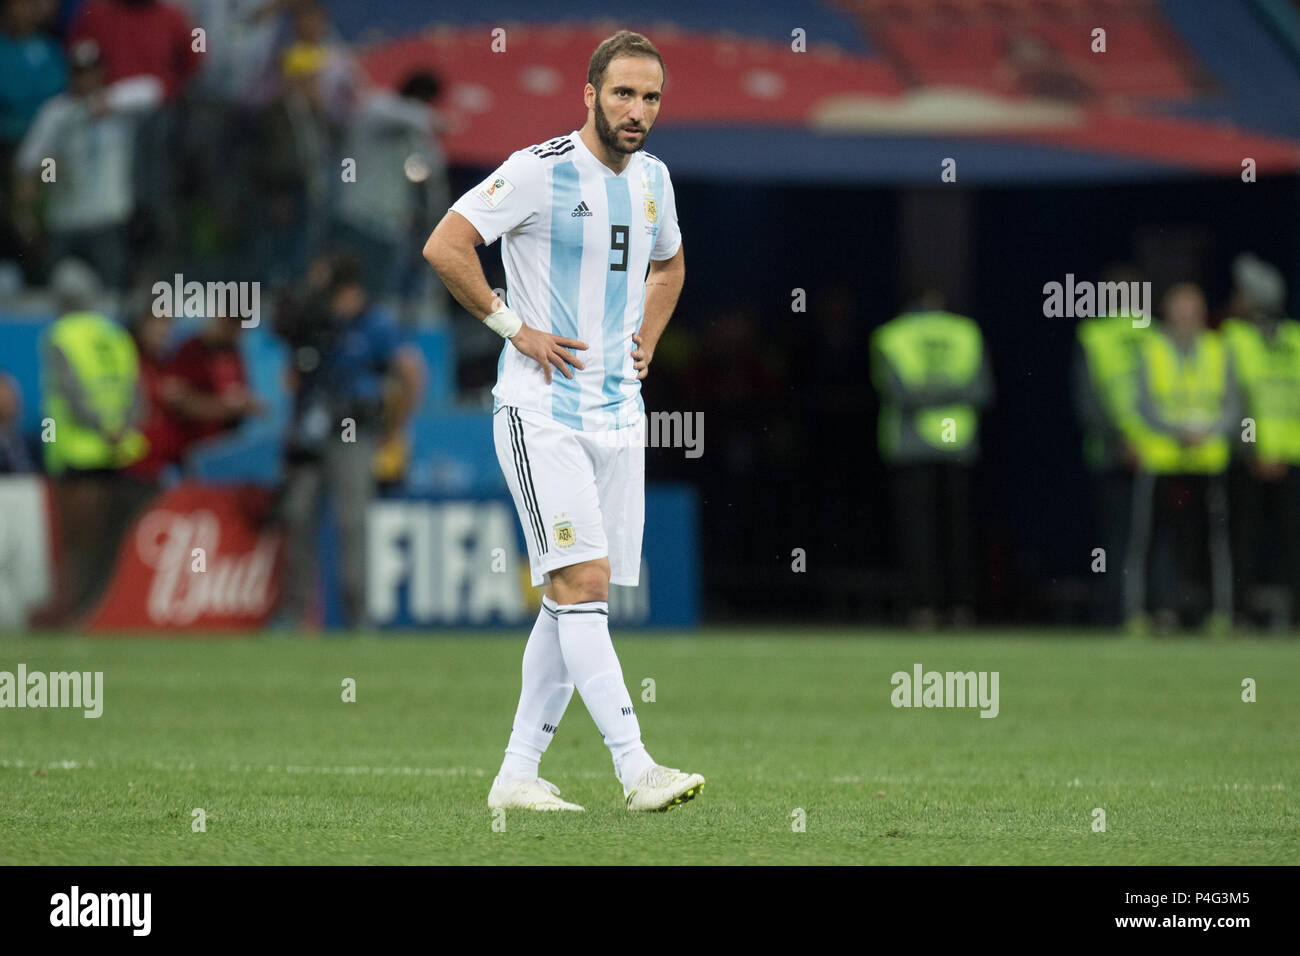 Nizhny Novgorod, Russia. 21 June 2018.  Gonzalo HIGUAIN (ARG) is disappointed, showered, disappointed, disappointed, sad, frustrated, frustrated, late-rate, full figure, Argentina (ARG) - Croatia (CR Argentina (ARG) - Croatia (CRO) 0: 3, Preliminary round, Group D, Game 23, on 21.06.2018 in Moscow, Football World Cup 2018 in Russia from 14.06 - 15.07.2018. | Usage worldwide Credit: dpa/Alamy Live News Credit: dpa picture alliance/Alamy Live News Stock Photo